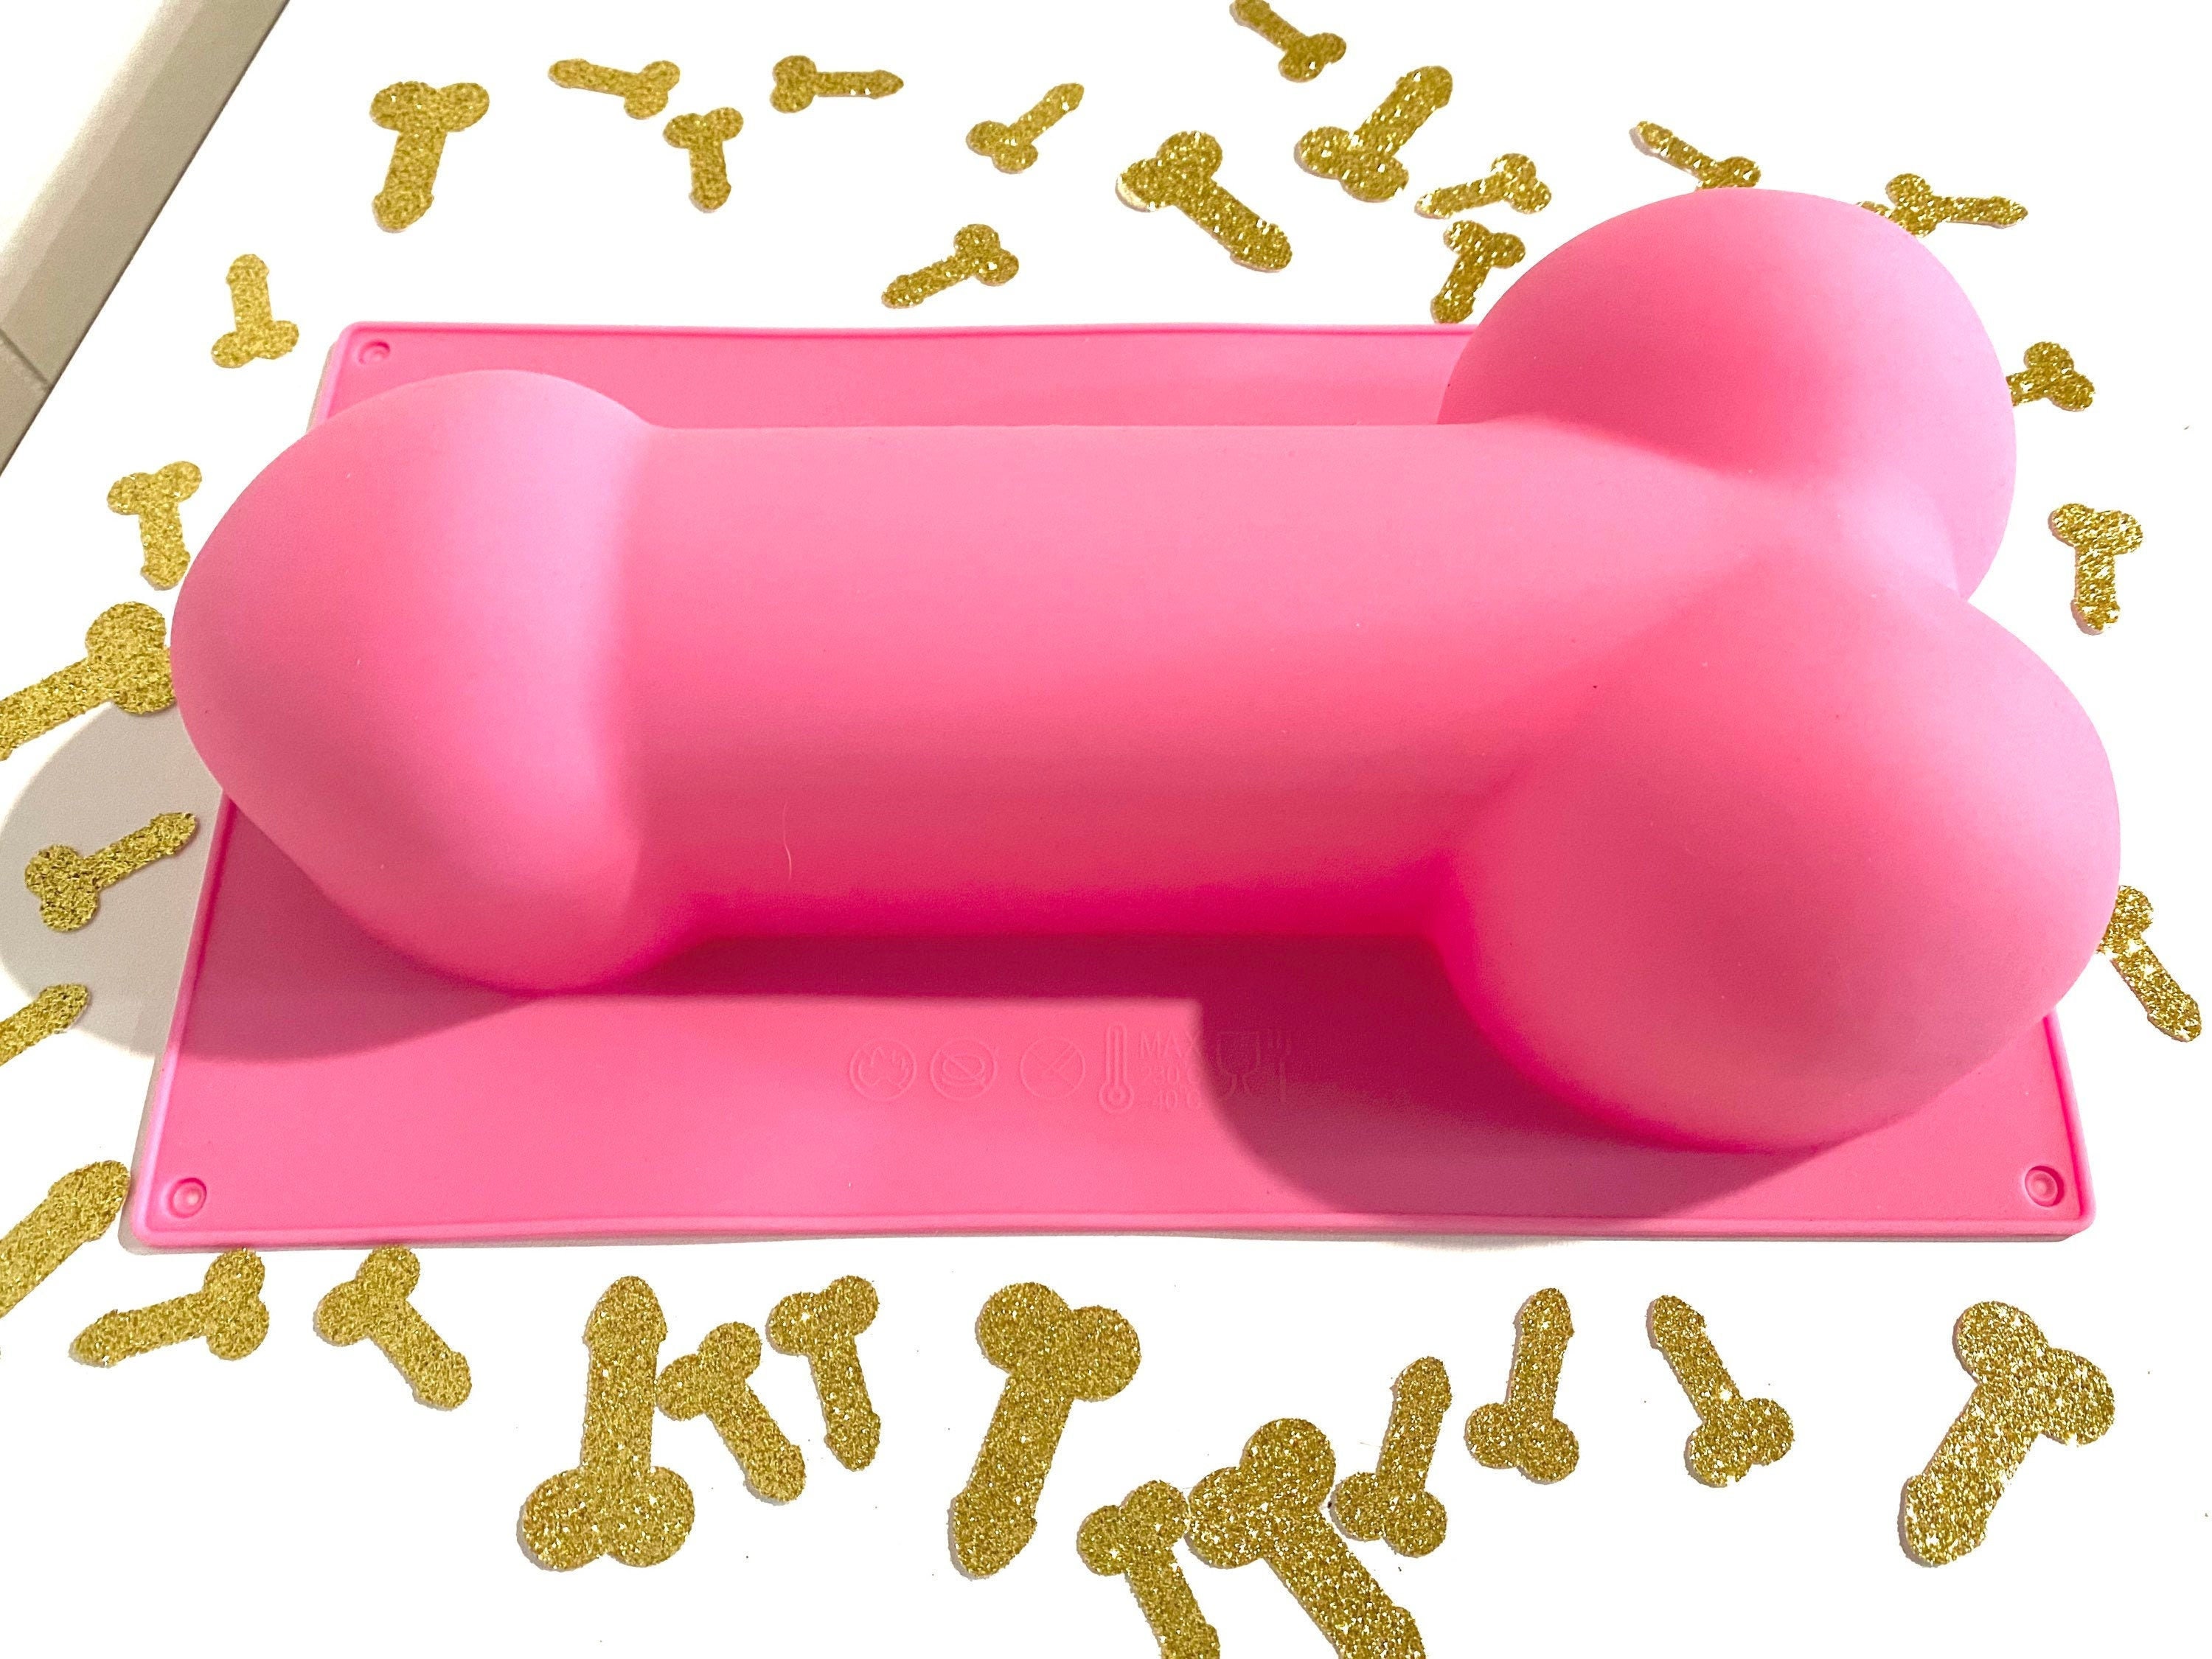 Penis Mold, Dick Mold, XXX Cake, Penis Cake, Dick Cake, 3-D Penis Mold, Penis Cupcakes, Adult Lollipops, Adult Candy Mold, Adult Chocolate  Mold